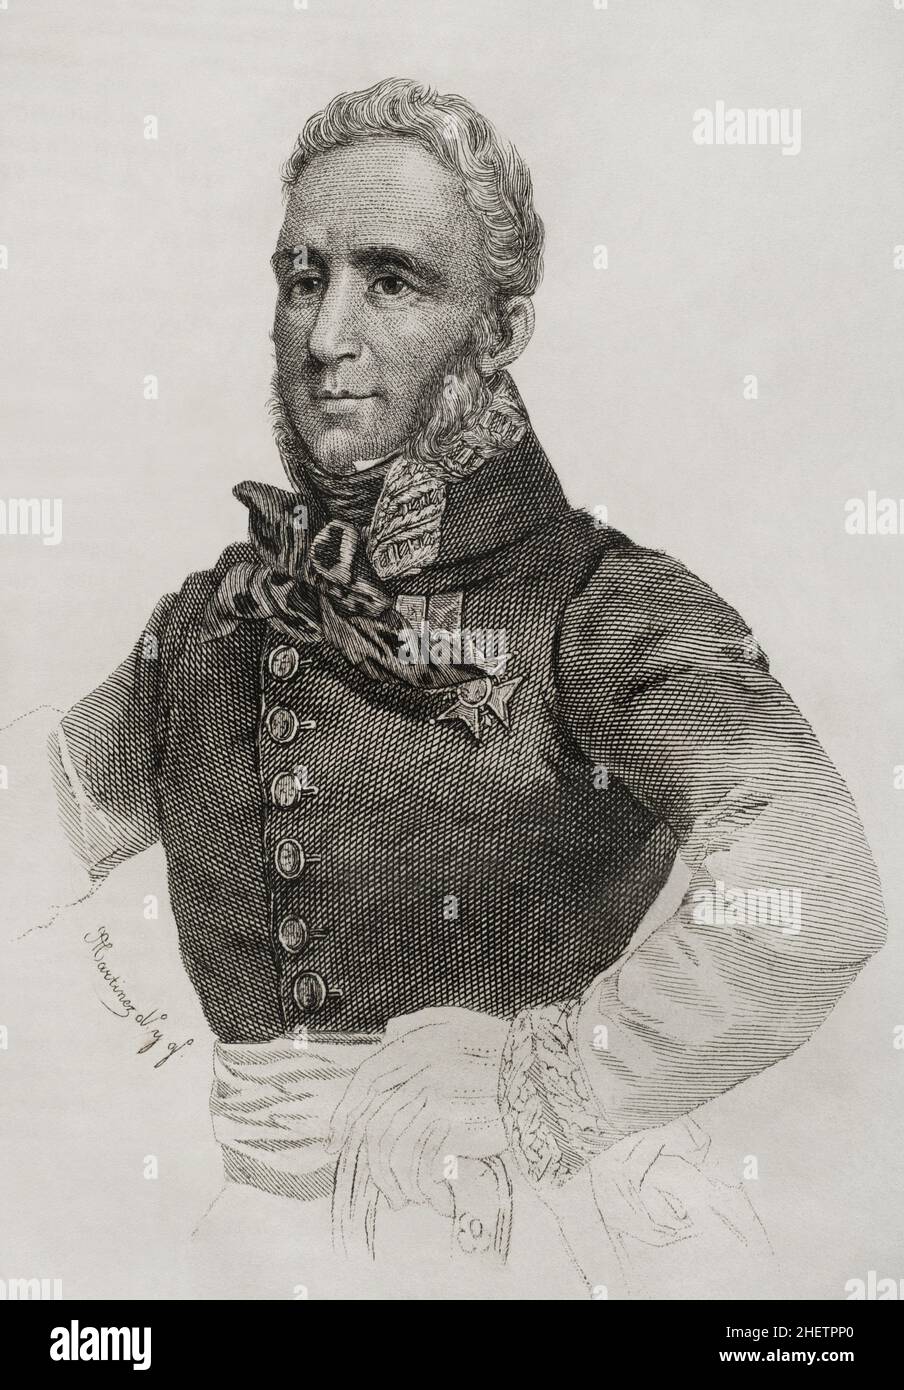 Francisco Espoz y Mina (1781-1836). Spanish military. Leader of the guerrillas of Navarre during the Spanish War of Independence (1808-1814). He fought on the Isabeline army in the First Carlist War (1833-1840), being the most responsible for the fight in the north of Spain against the Carlists. Portrait. Engraving by Martínez. Panorama Español, Crónica Contemporánea. Volume III. Madrid, 1845. Stock Photo